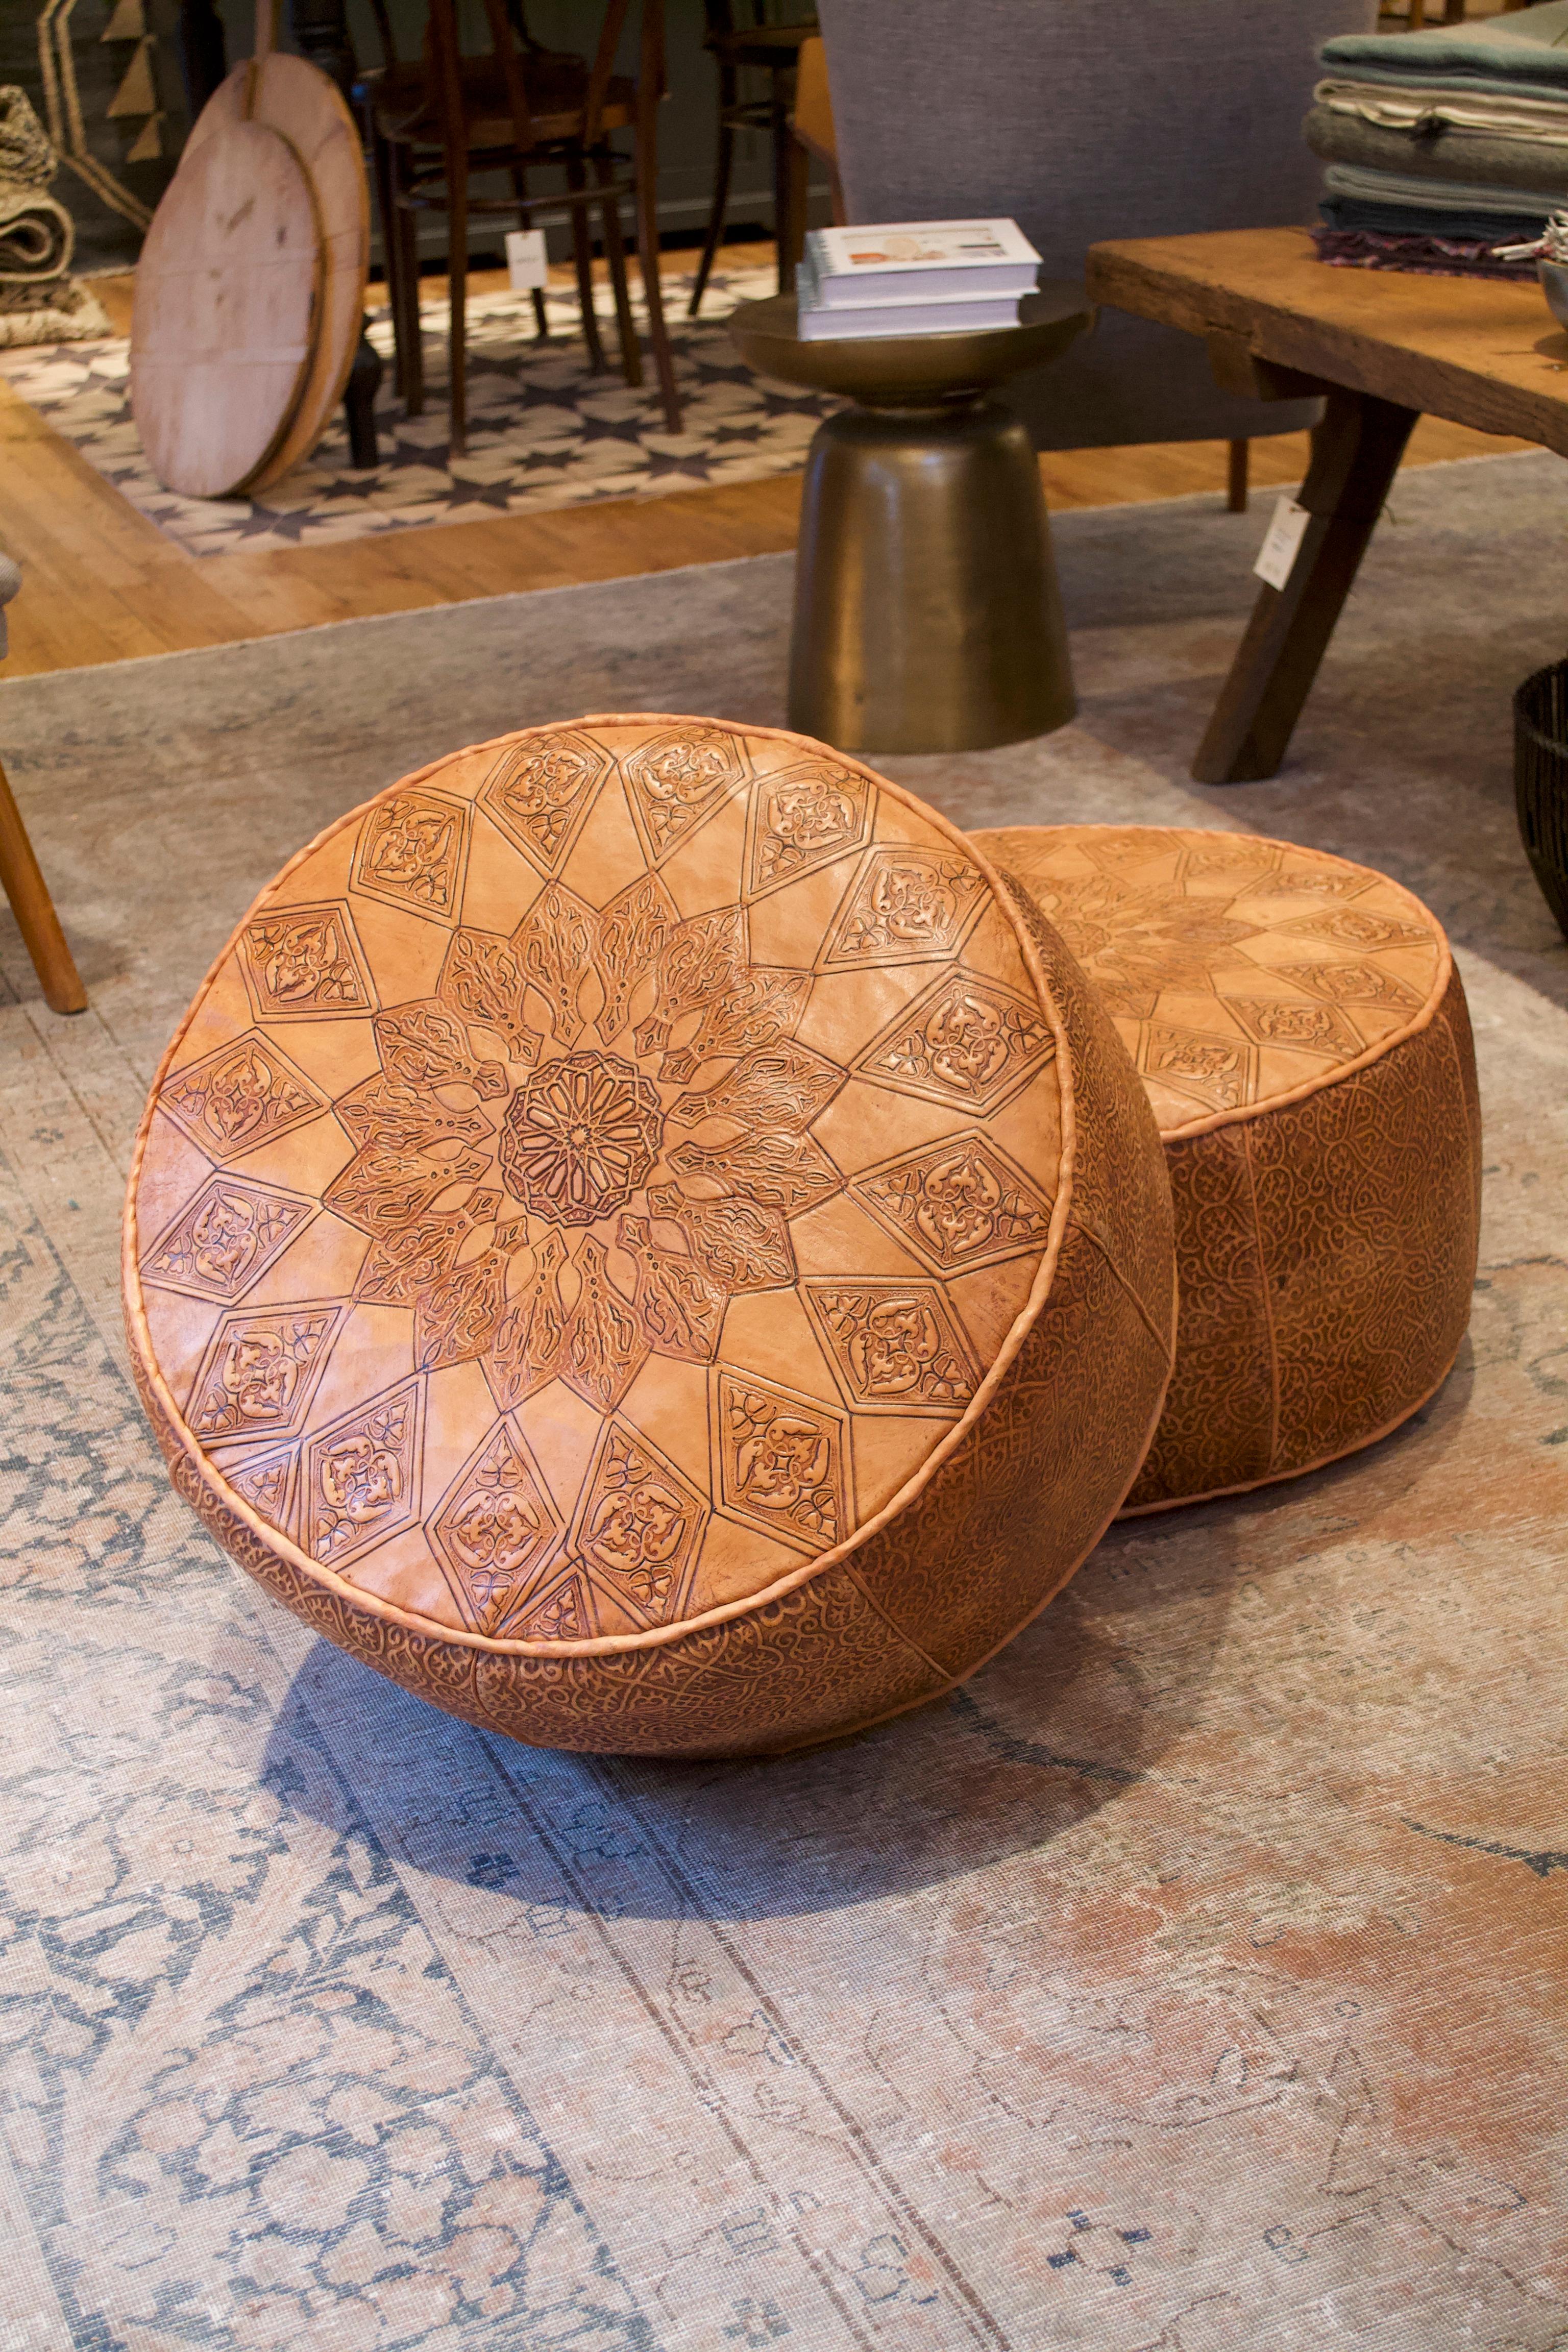 Warm caramel colored leather Moroccan pouf with finely detailed engravings. Leather will age gracefully over time.